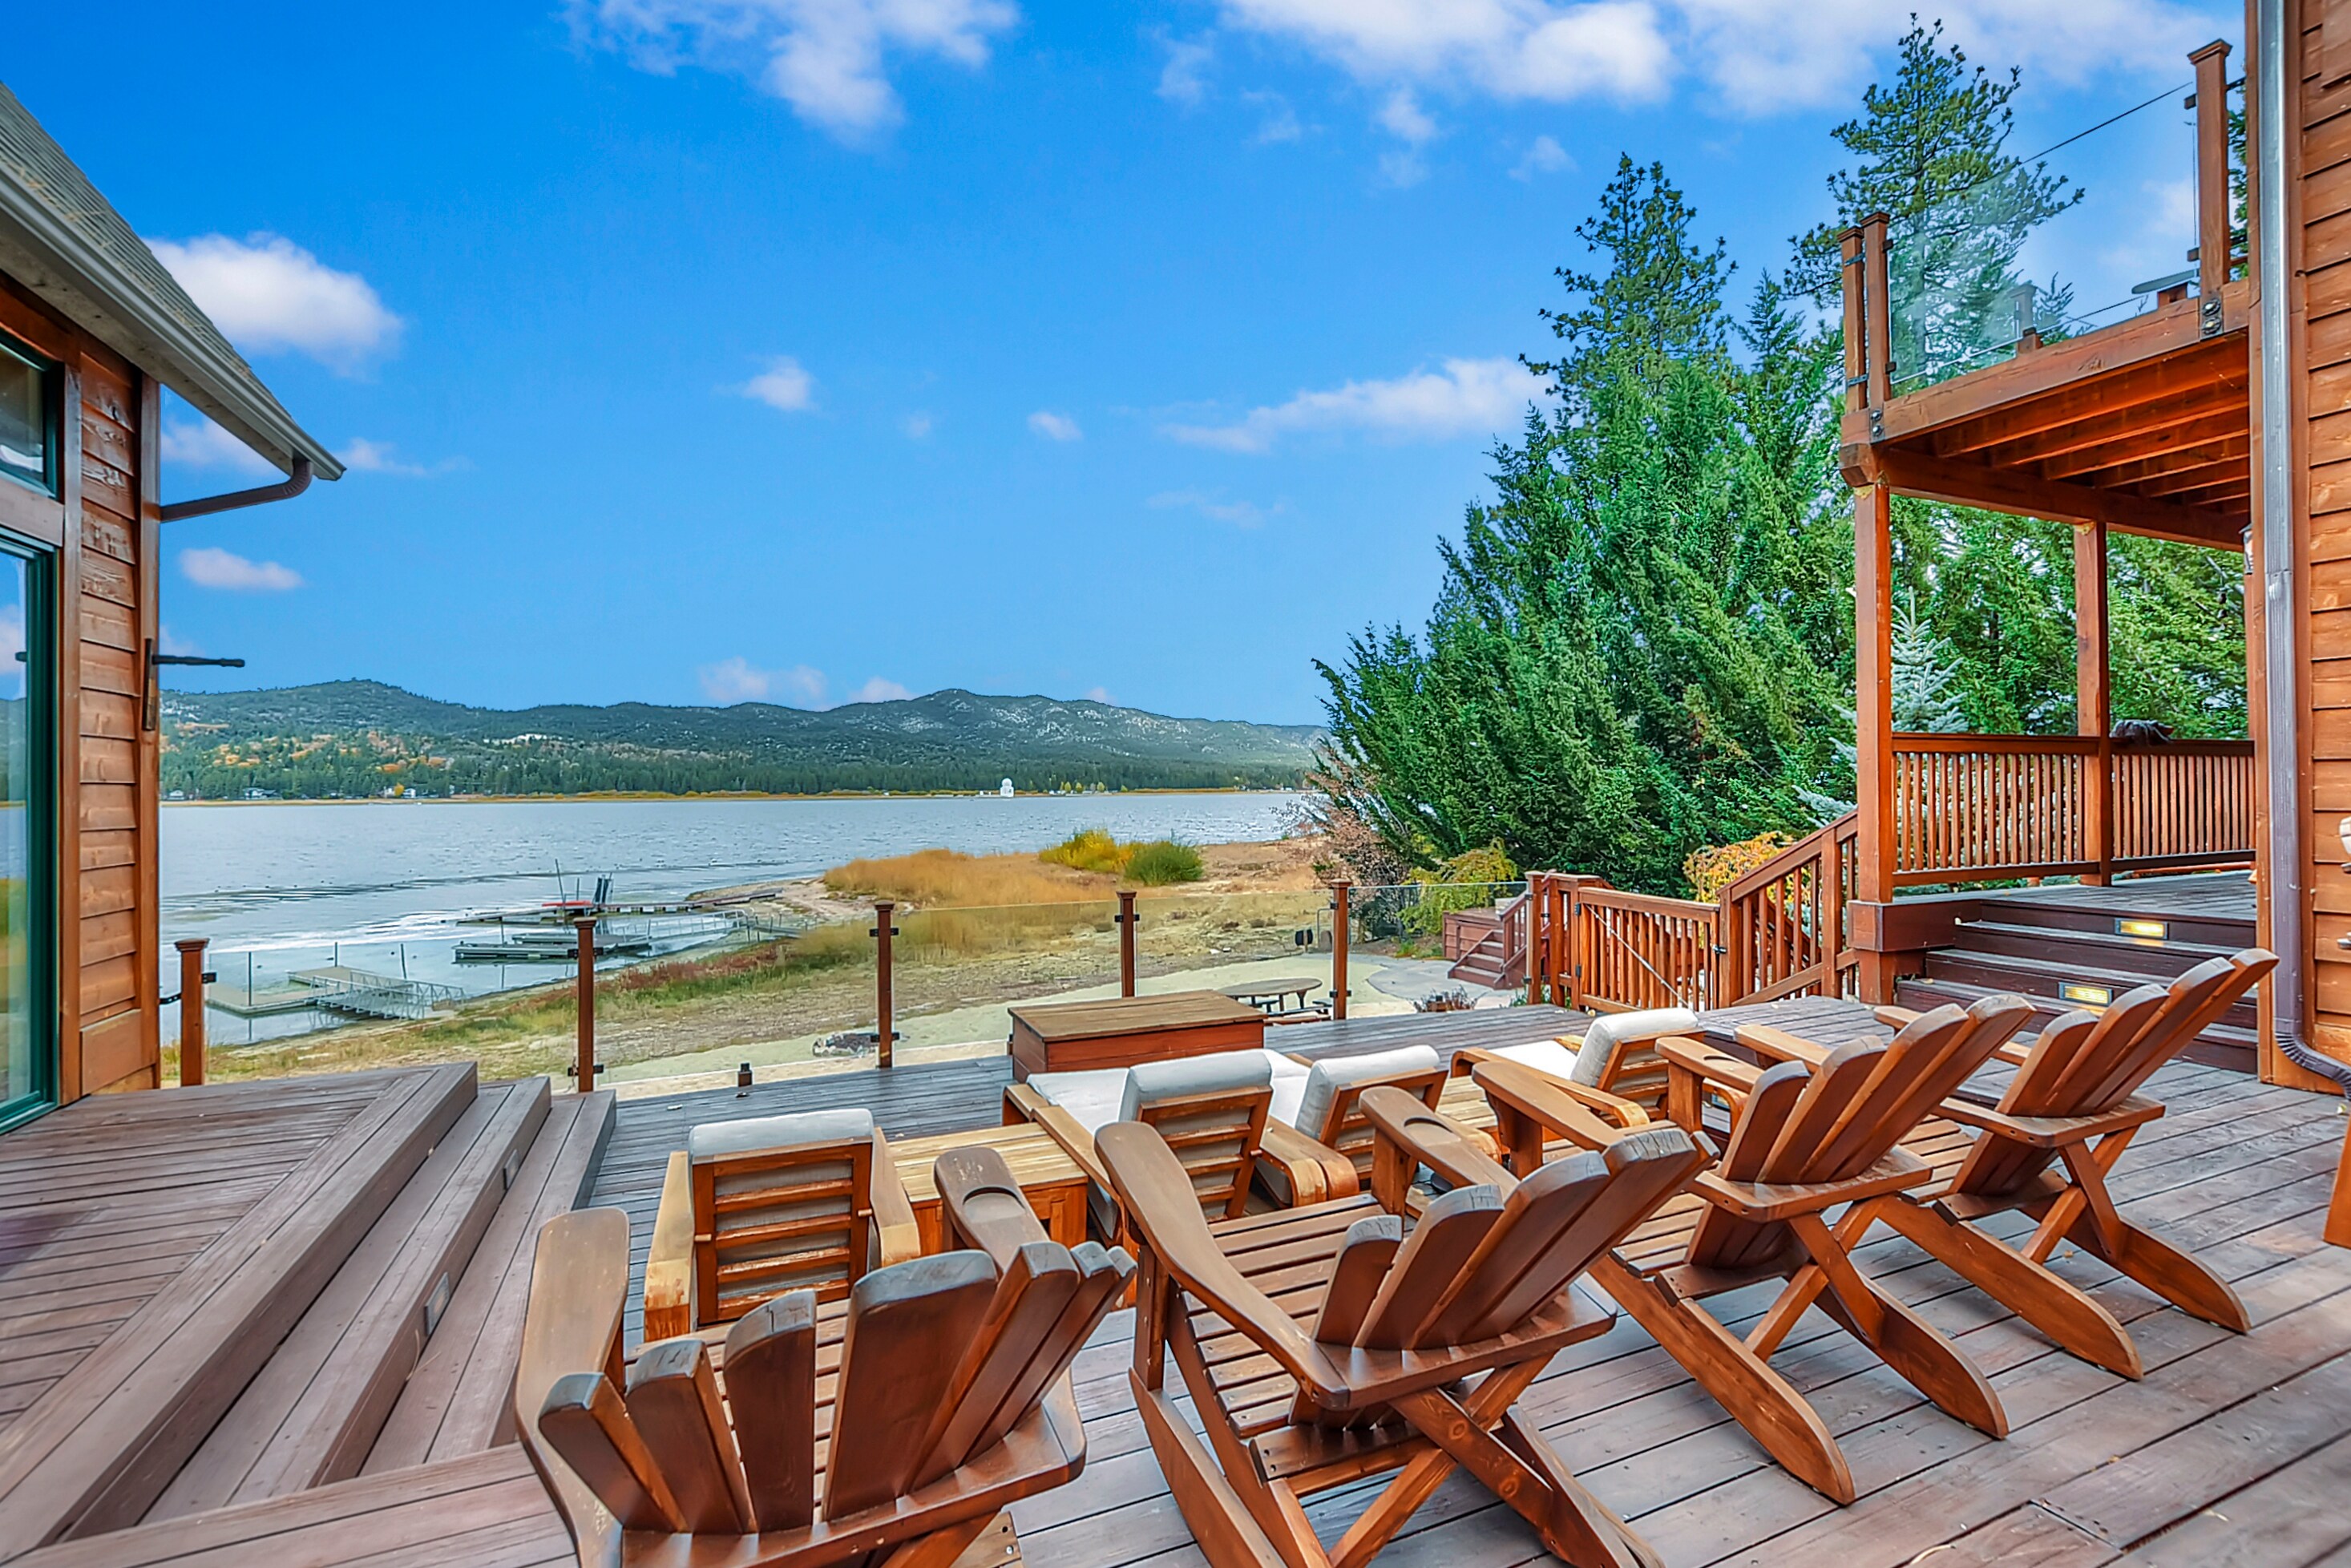 Spacious deck with plenty of seating to enjoy views of the lake.